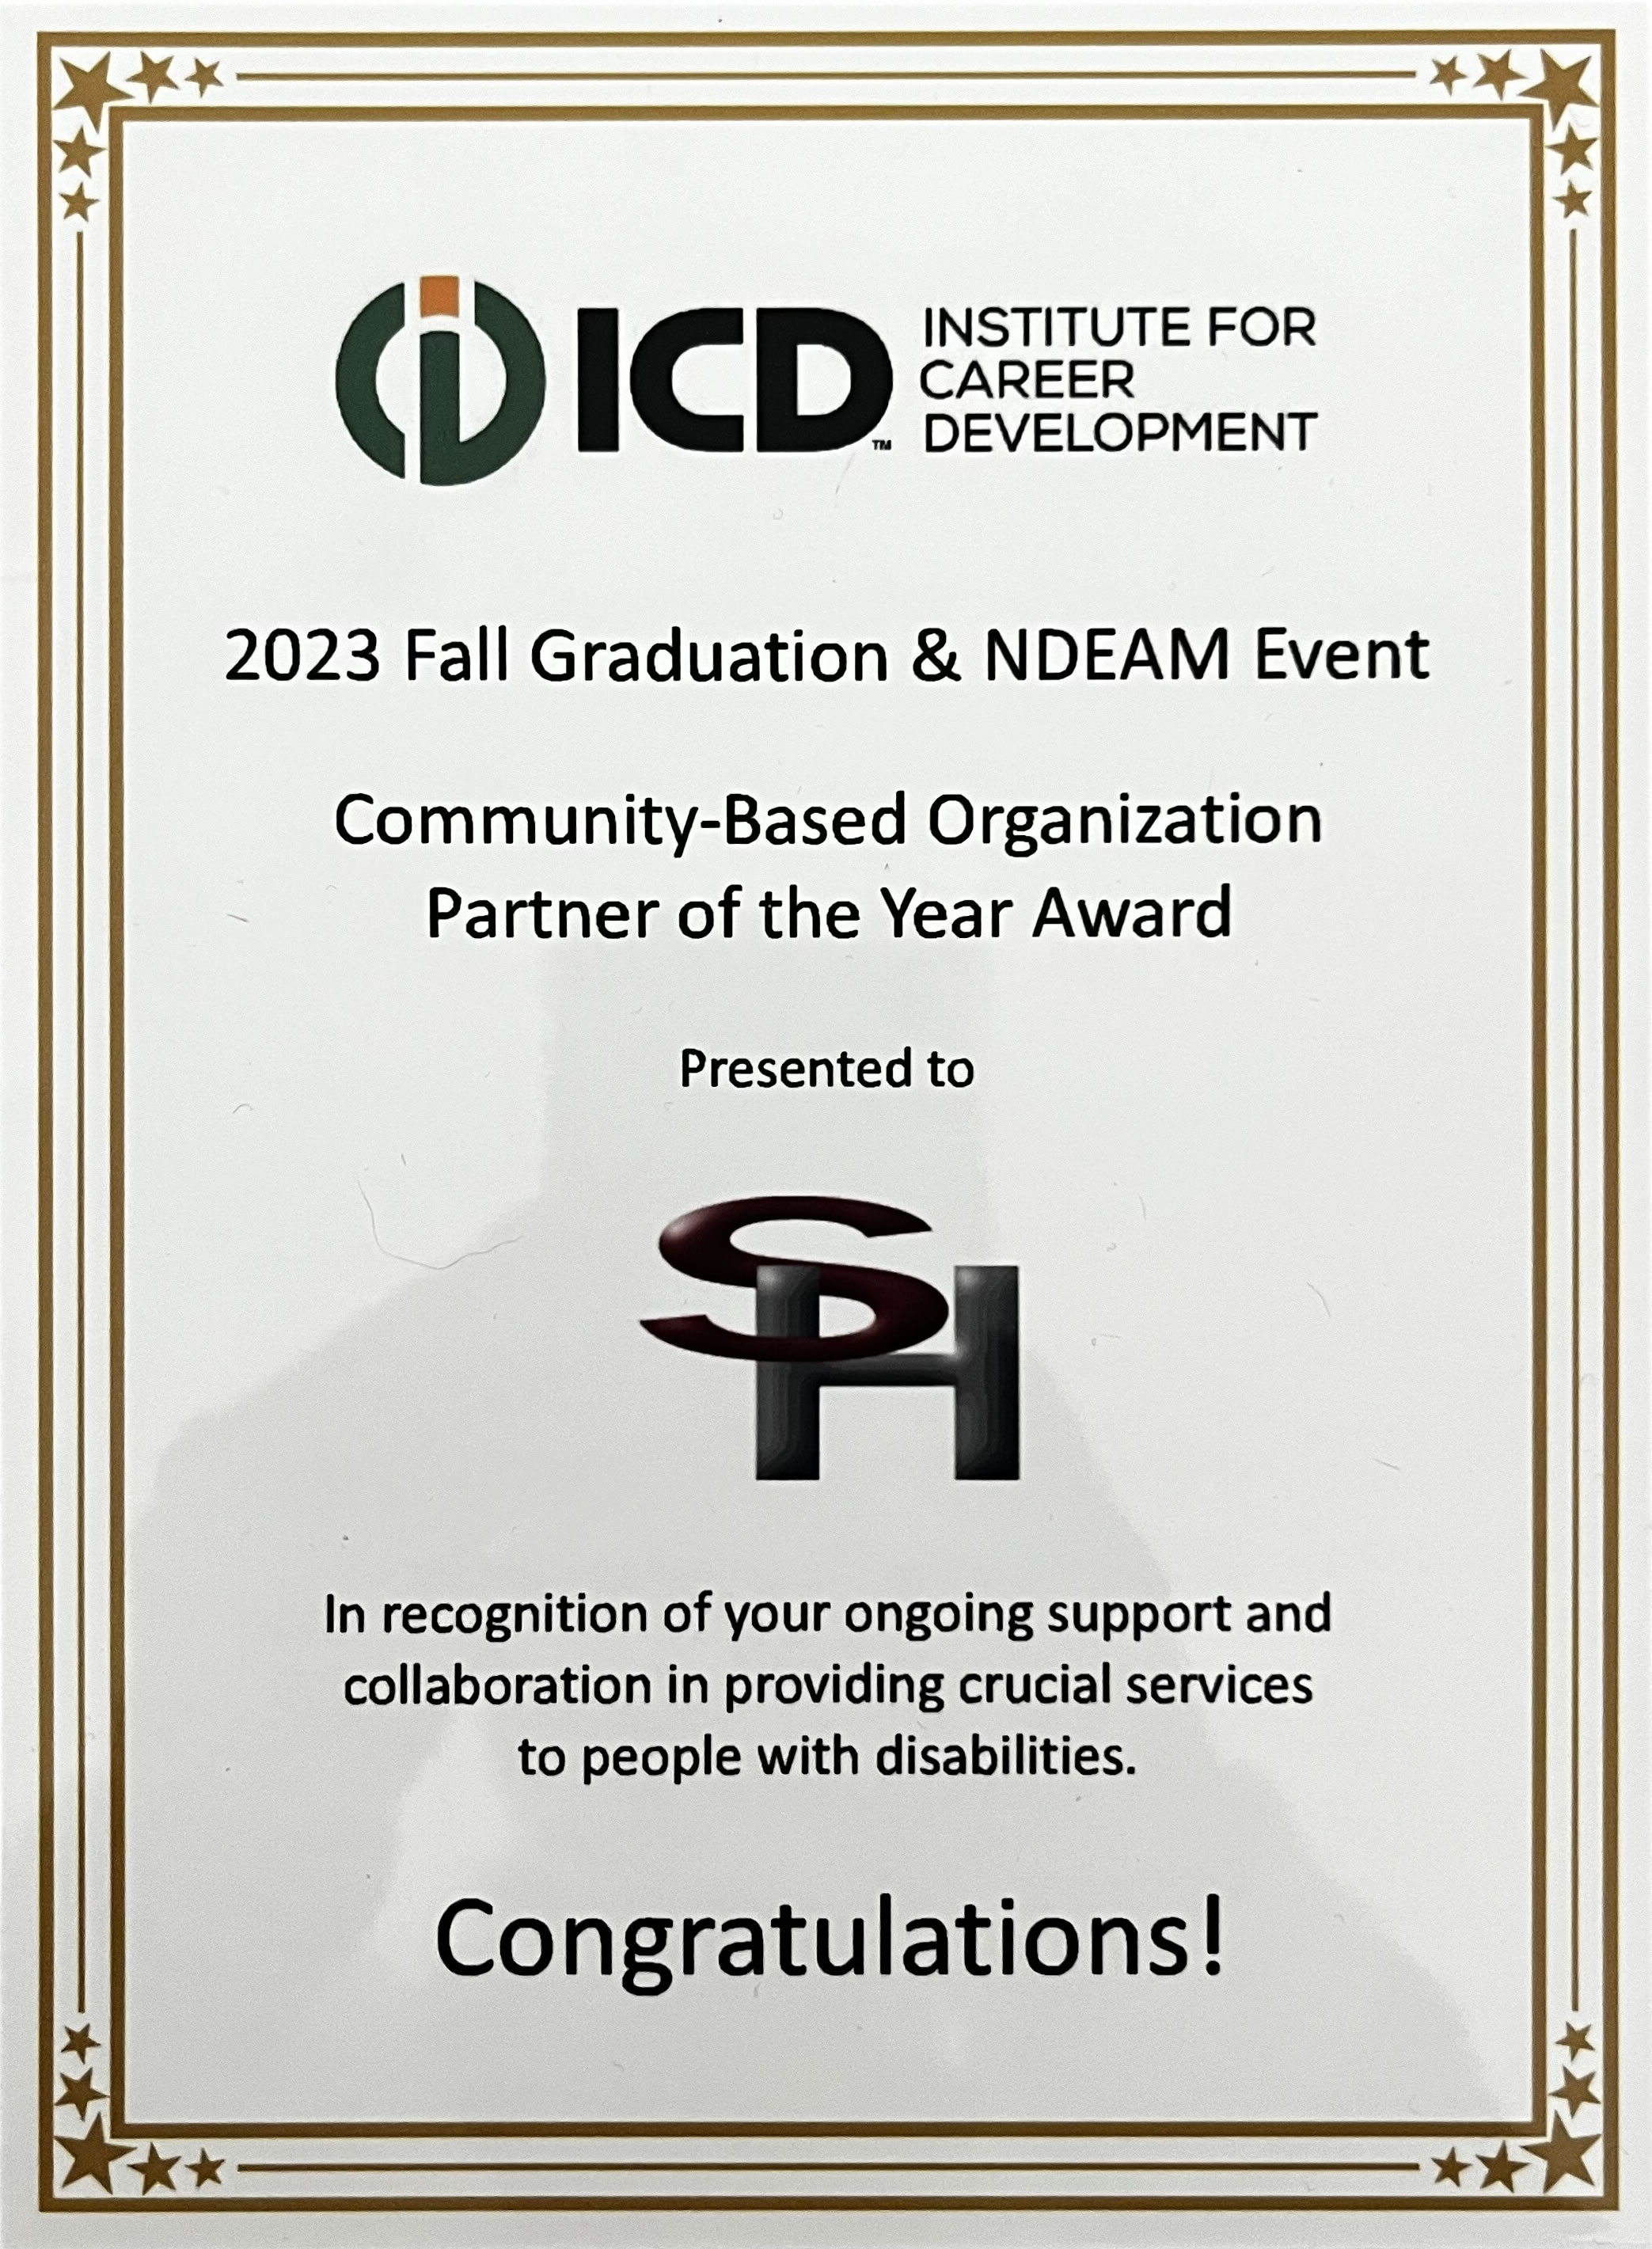 the ICD Partner of the Year Award